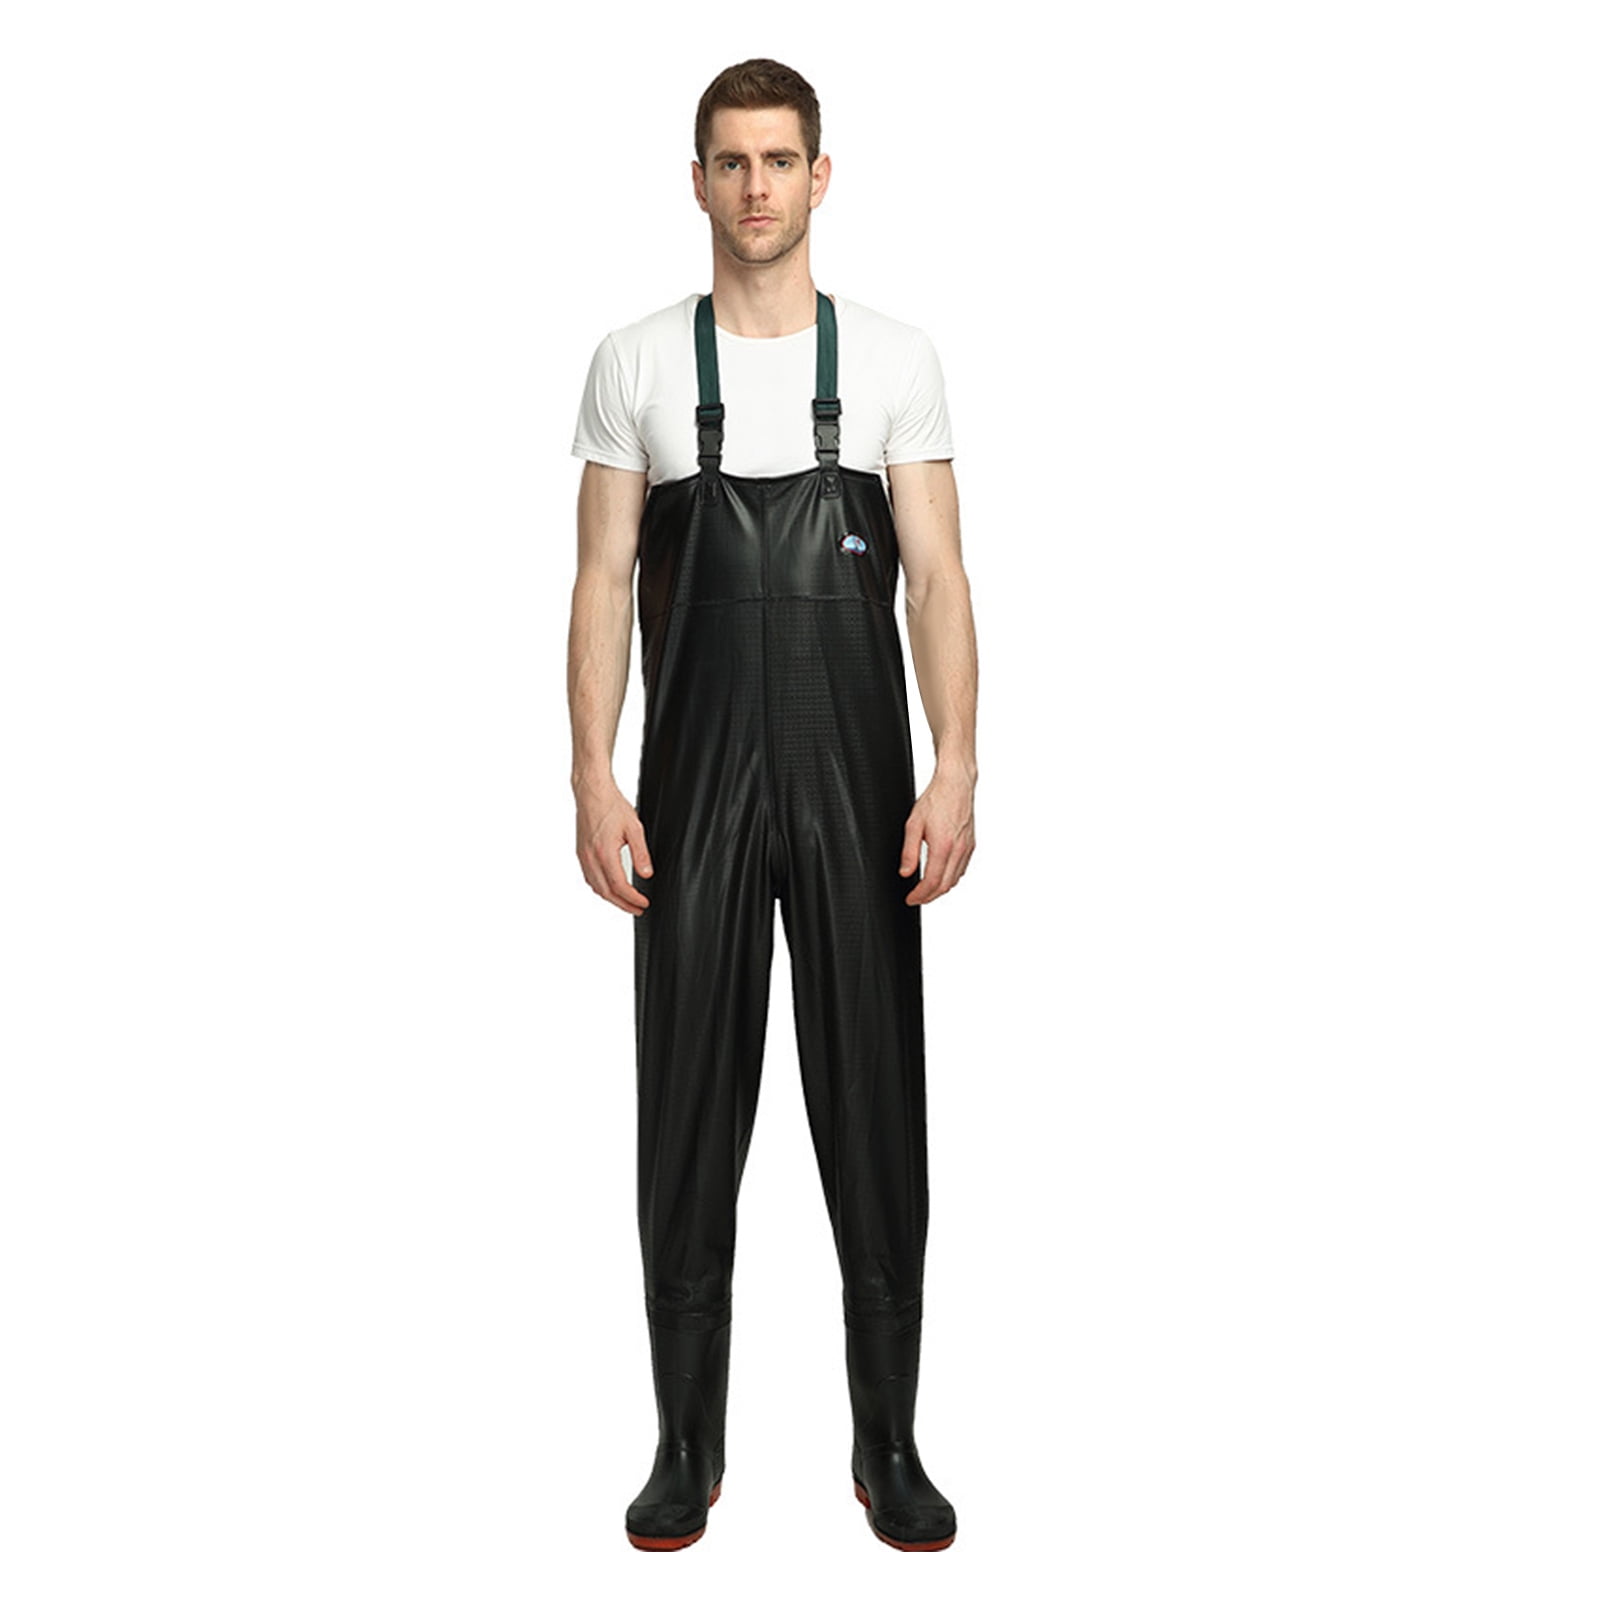 Details about   Outdoor Fishing Waterproof Waders Waist Pants Breathable 3000 Chest Wading yy56 